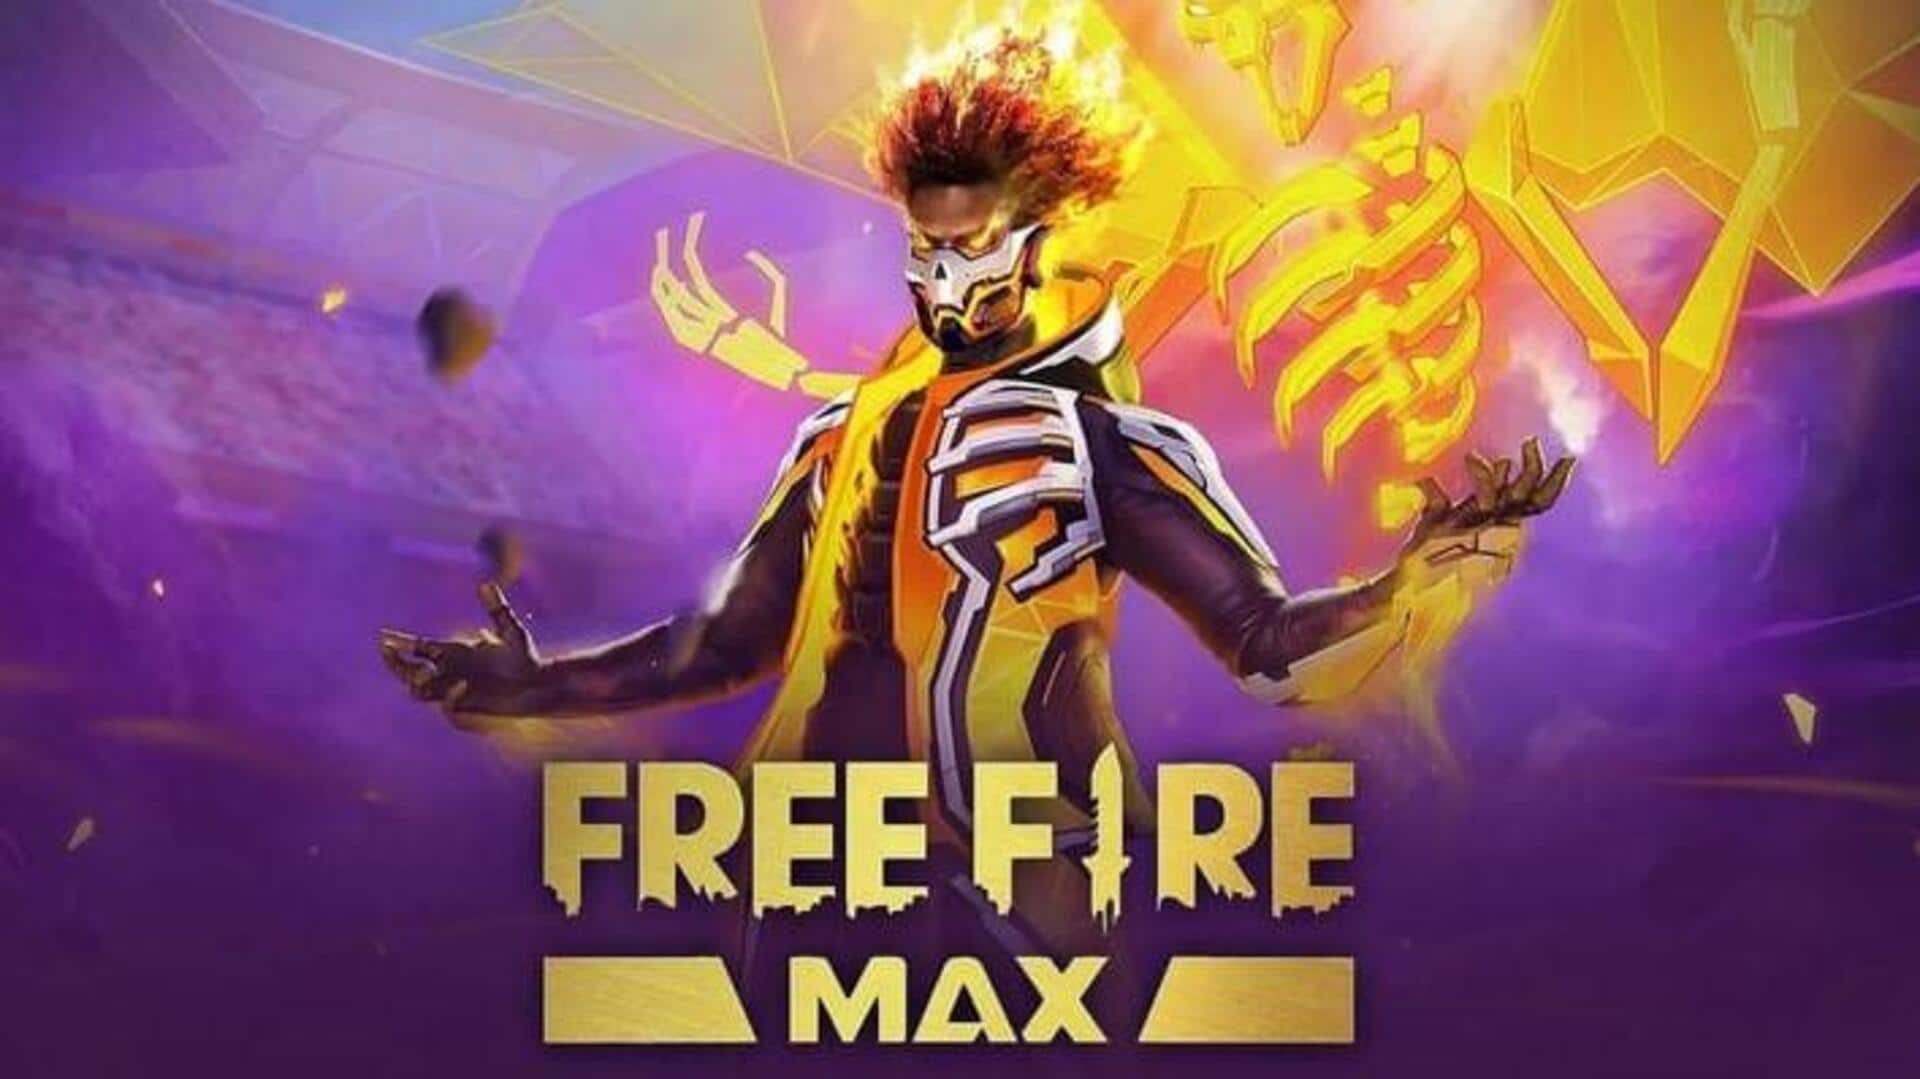 Free Fire MAX codes for August 16: Collect additional rewards